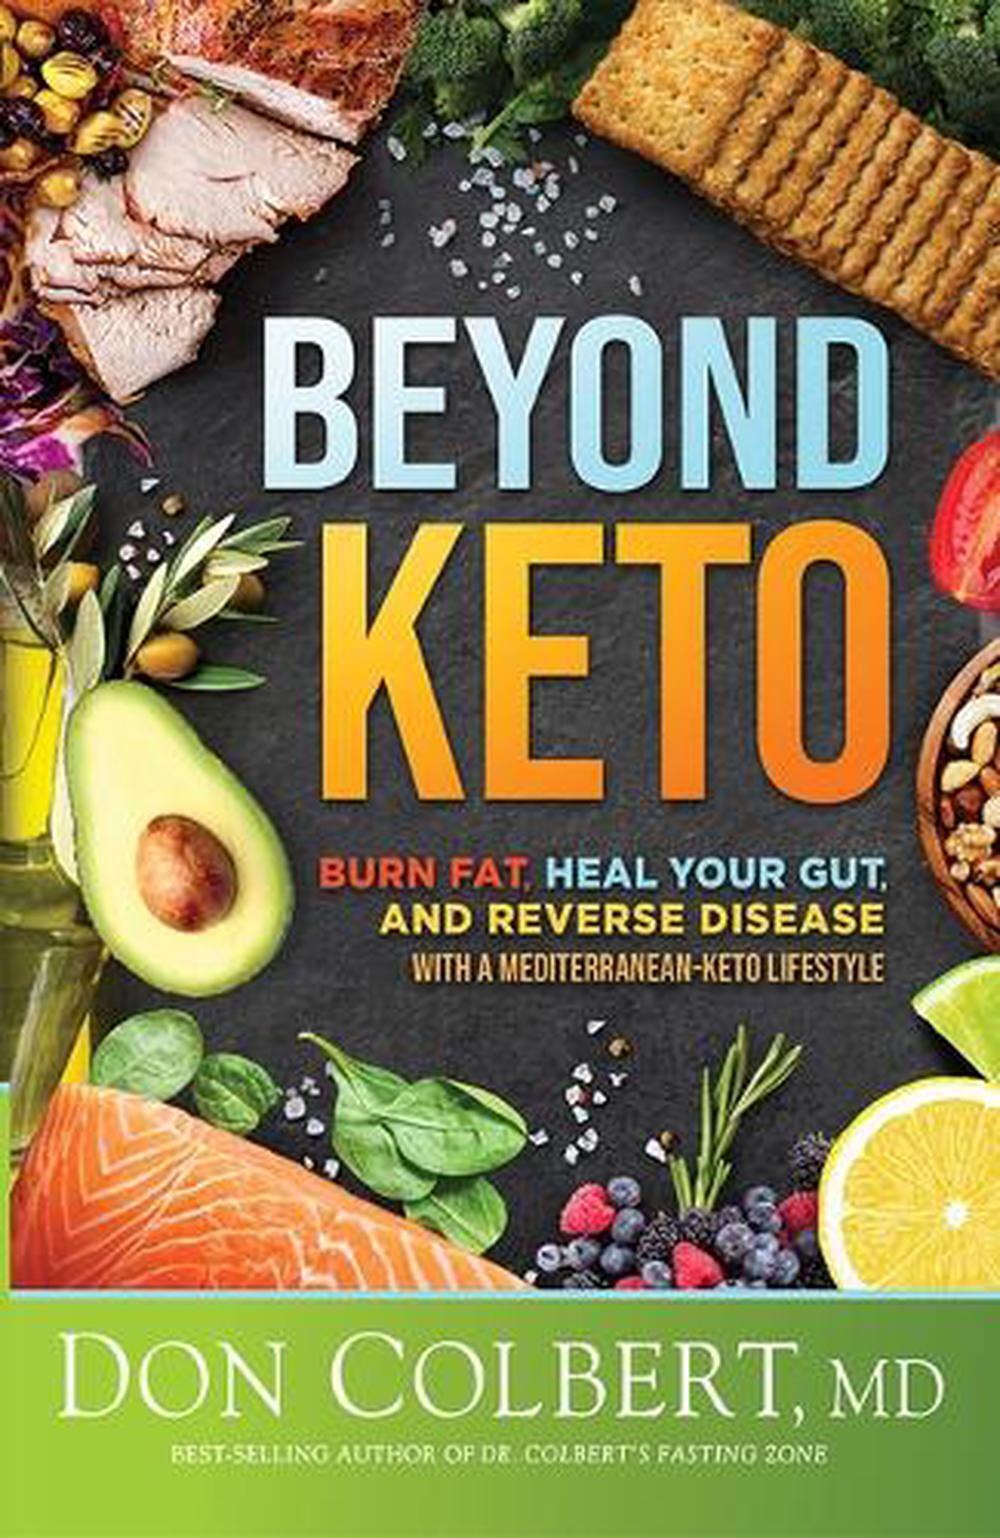 Beyond Keto: Burn Fat, Heal Your Gut, and Reverse Disease with a Mediterranean-K